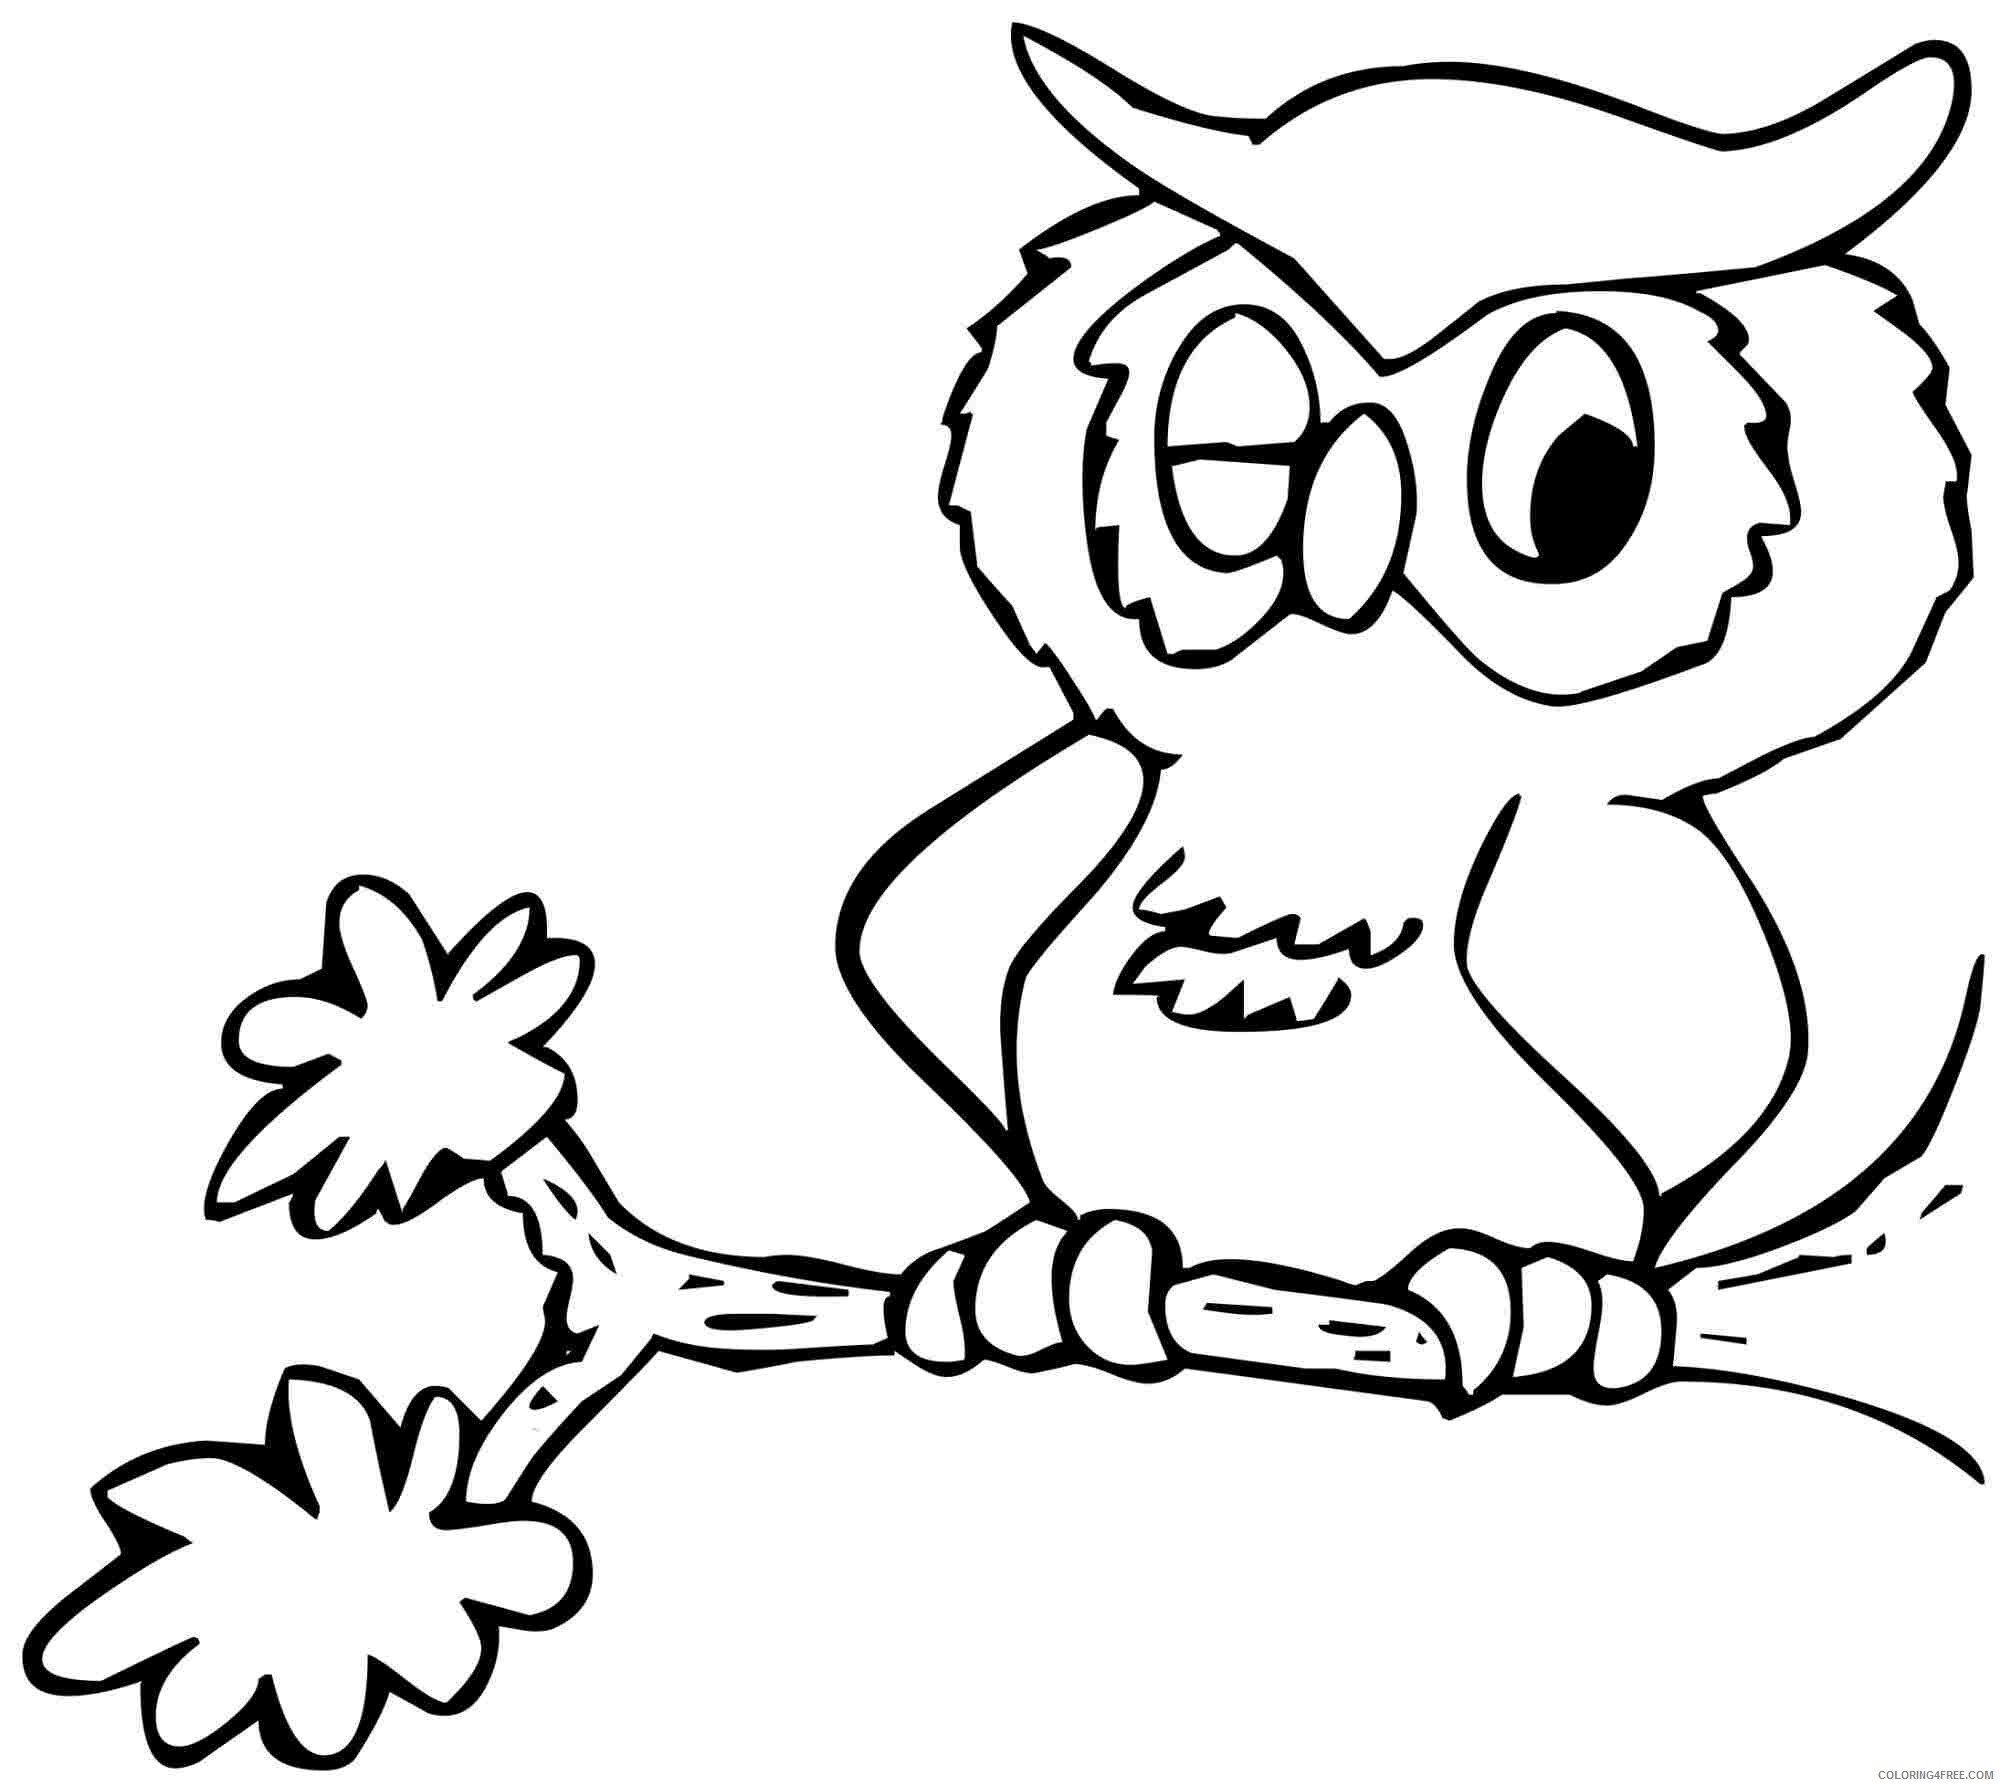 Animal Coloring Pages for Teens Printable Sheets For Girls Animals 2021 a 0355 Coloring4free